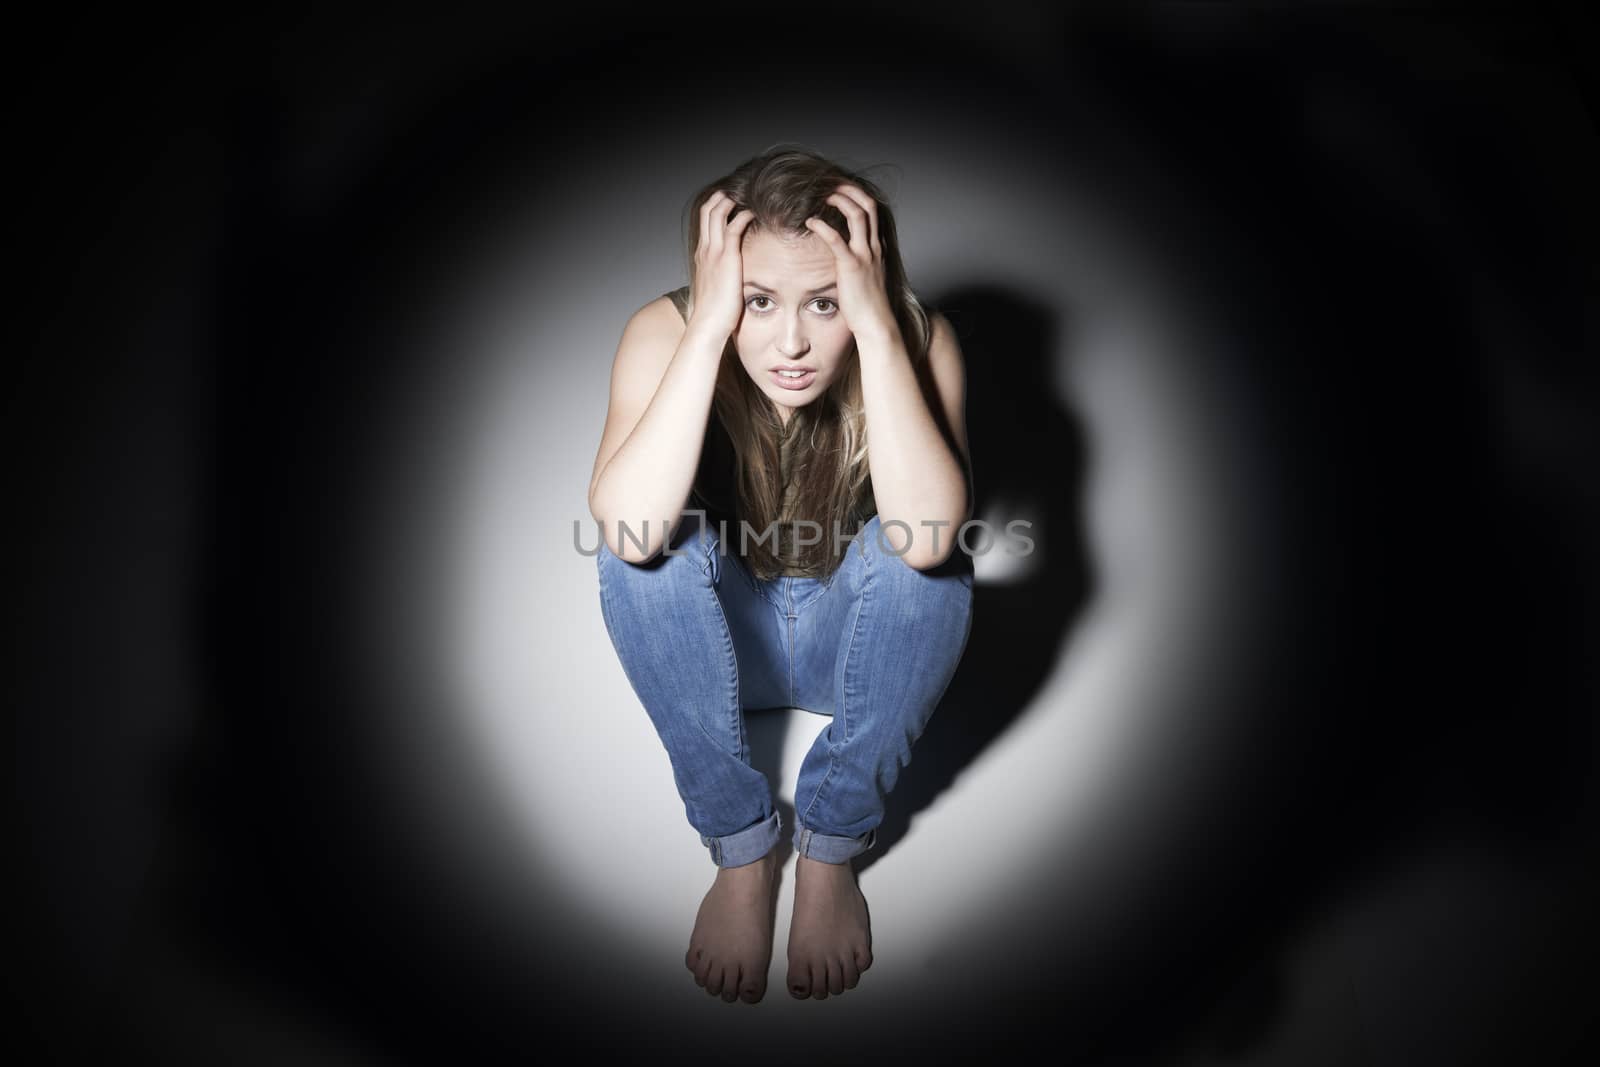 Unhappy Woman Sitting In Pool Of Light by HWS